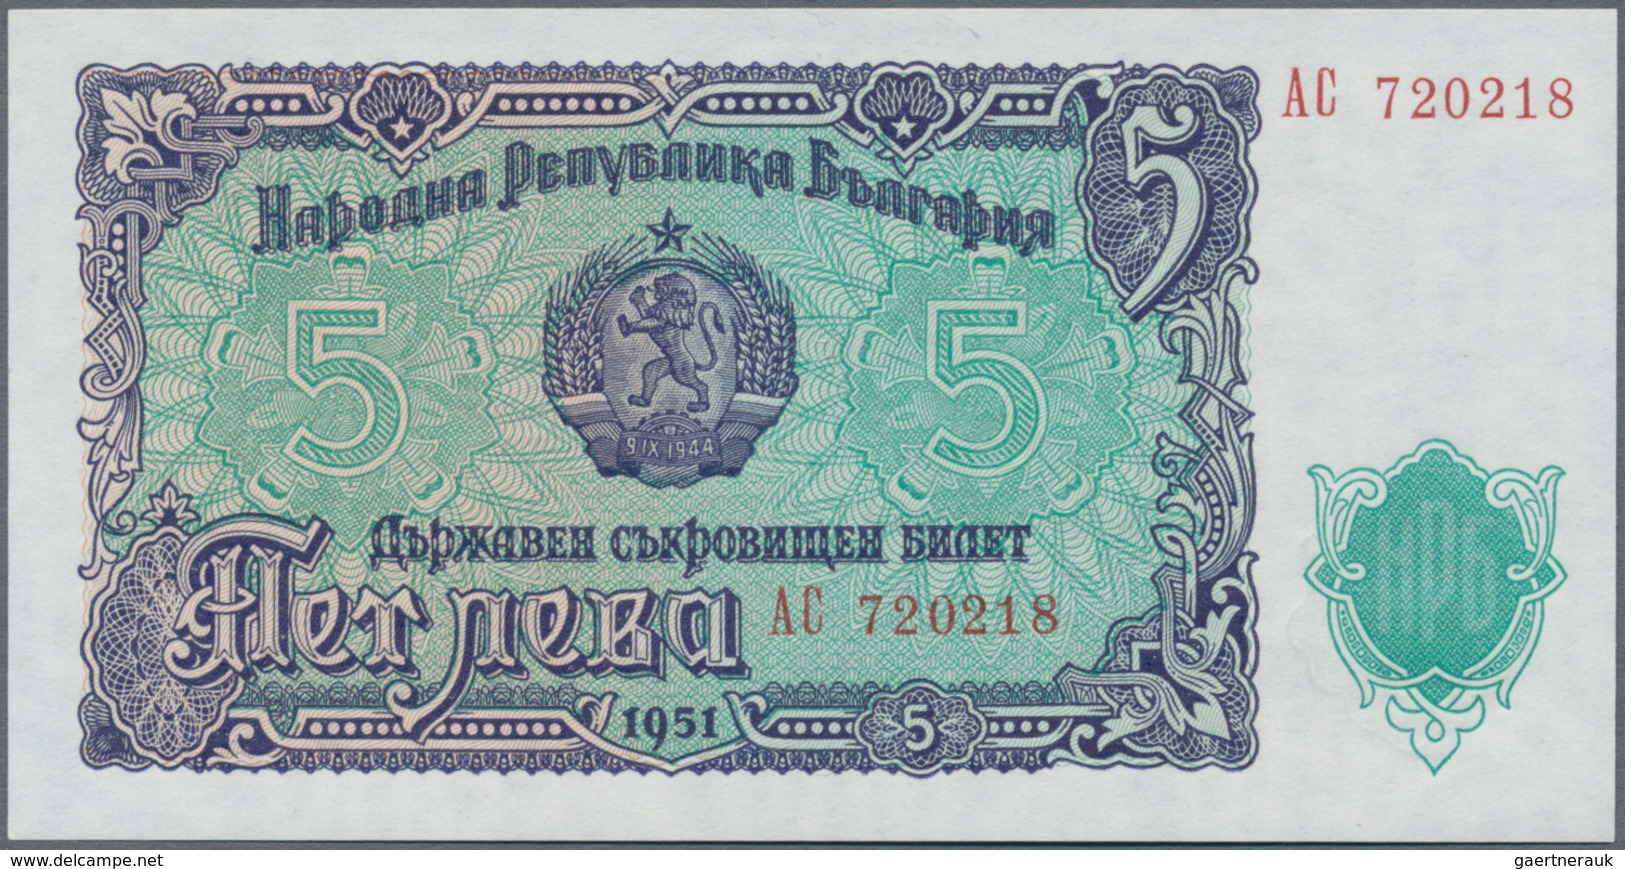 Bulgaria / Bulgarien: Set with 9 banknotes series 1951 from 1 – 500 Leva, P.80-87A in aUNC/UNC condi